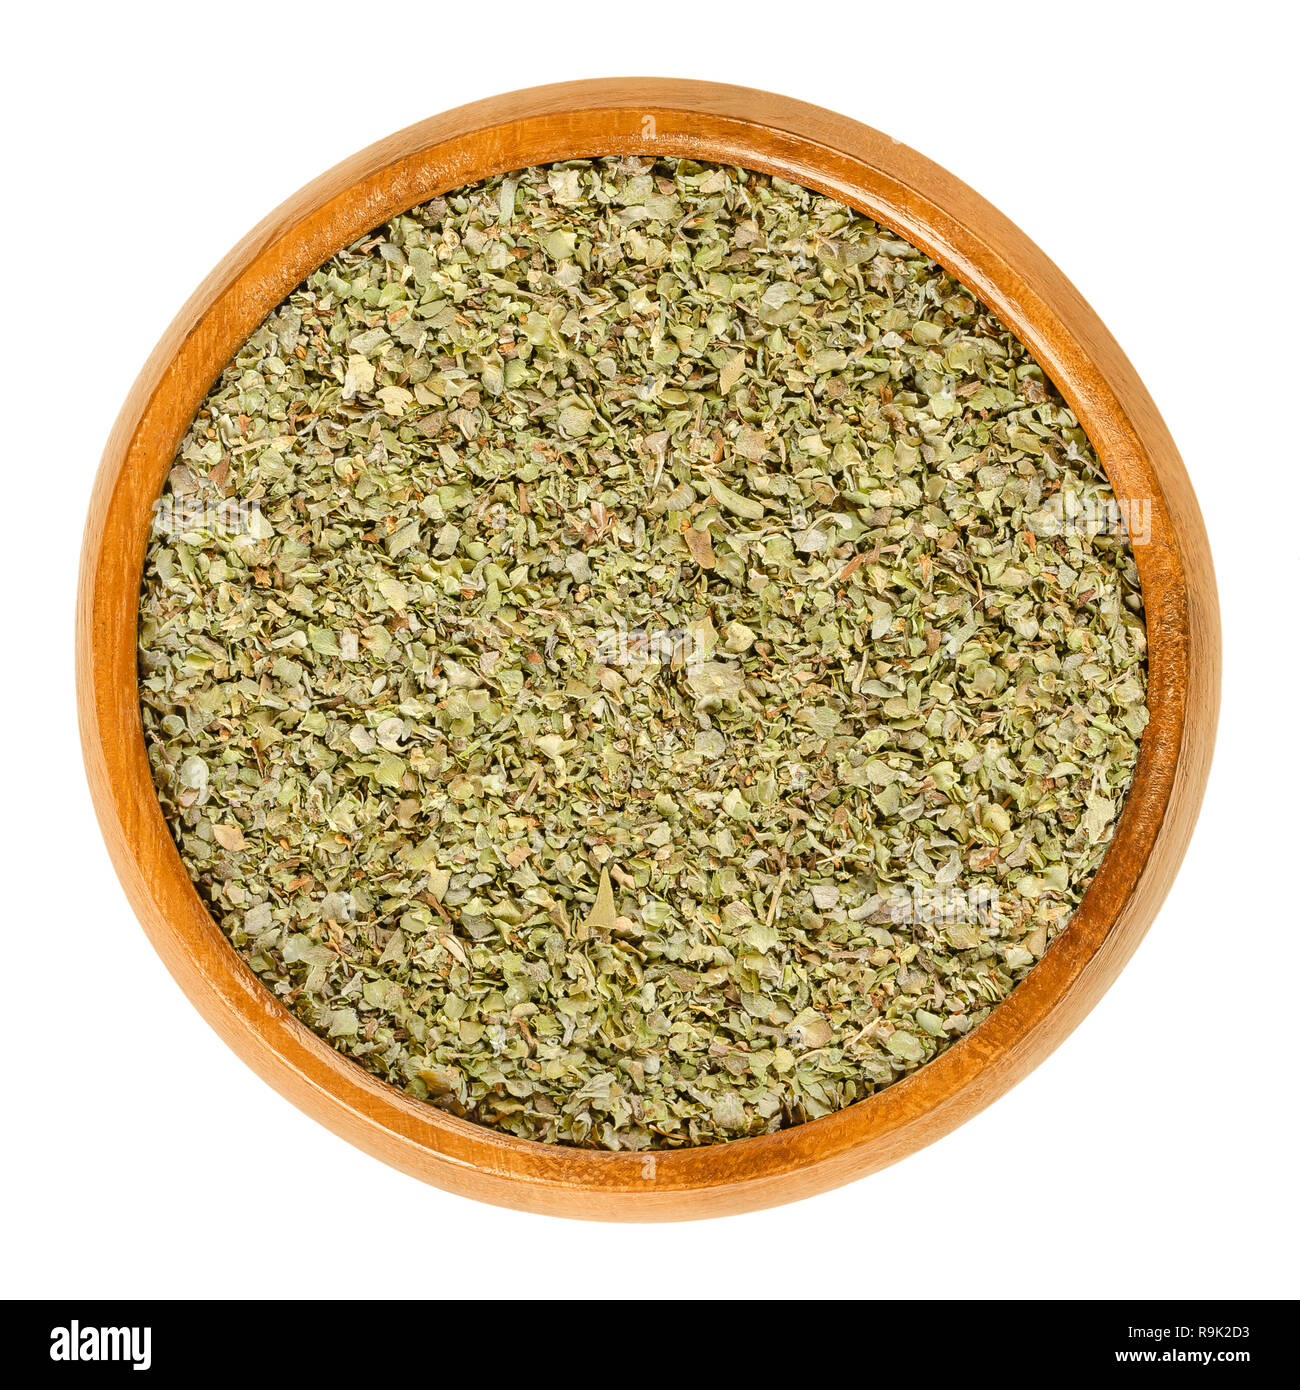 Dried marjoram in wooden bowl. Origanum majorana, also sweet, knotted or pot marjoram. Green herb and spice with sweet pine and citrus flavors. Stock Photo